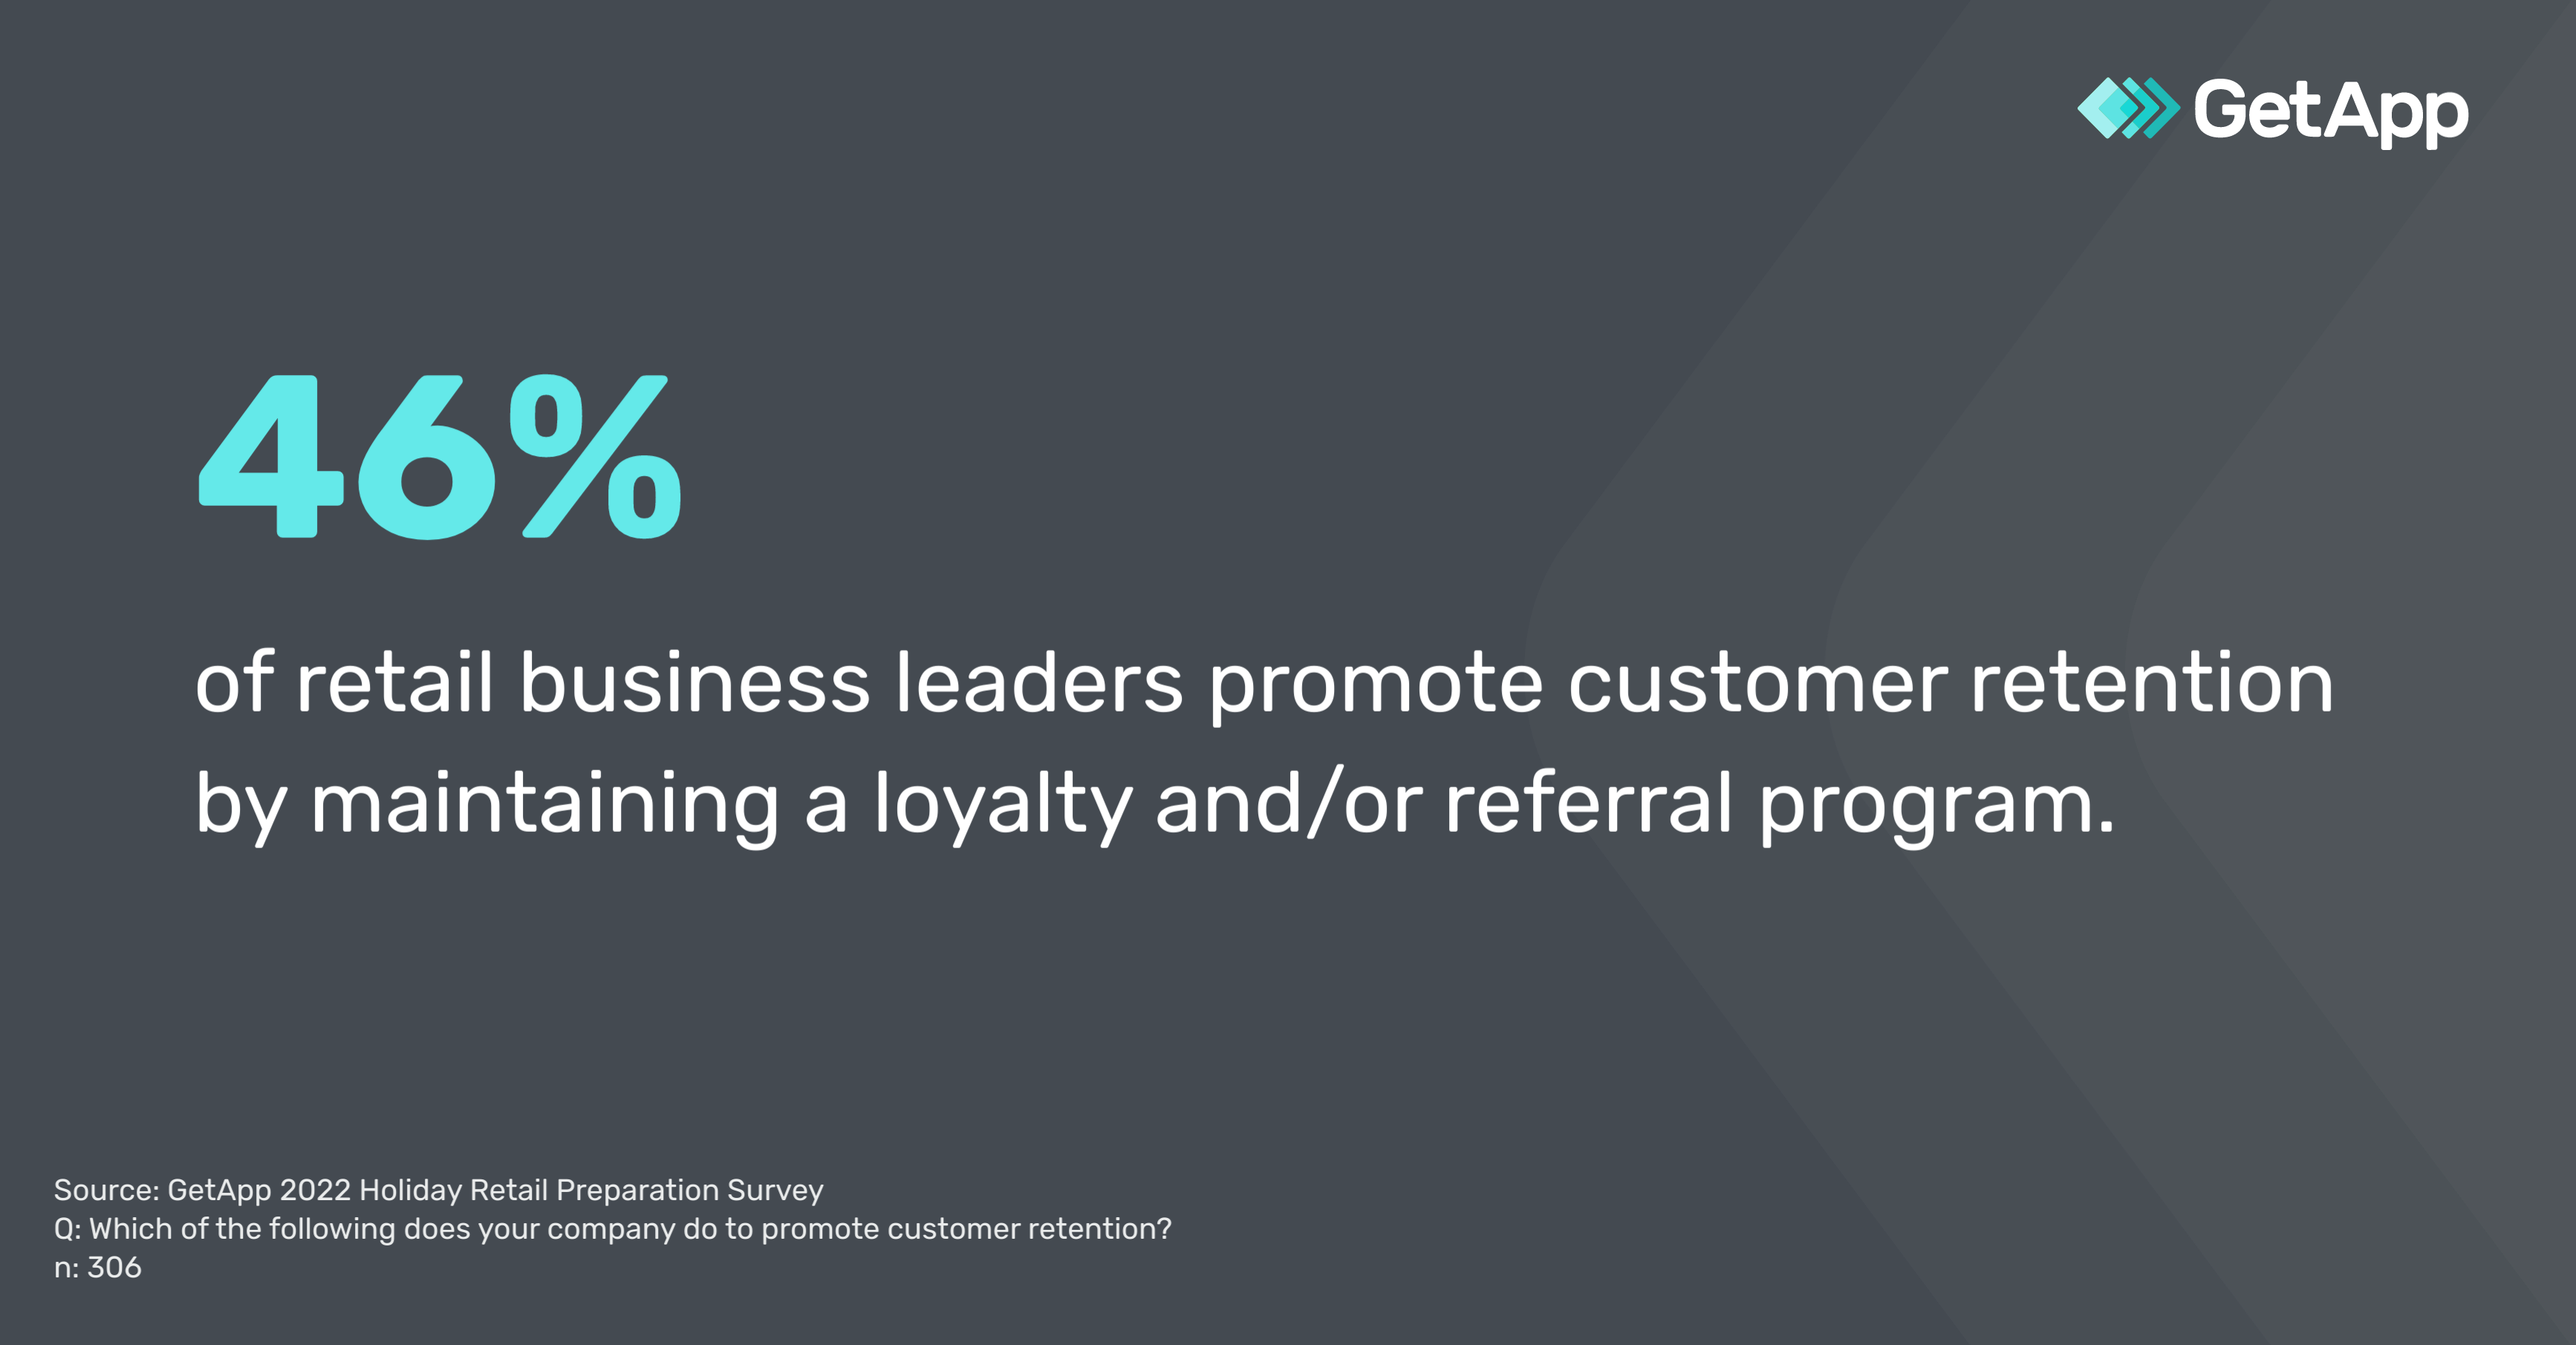 Forty-six percent of retail business leaders promote customer retention by maintaining a loyalty andor referral program.